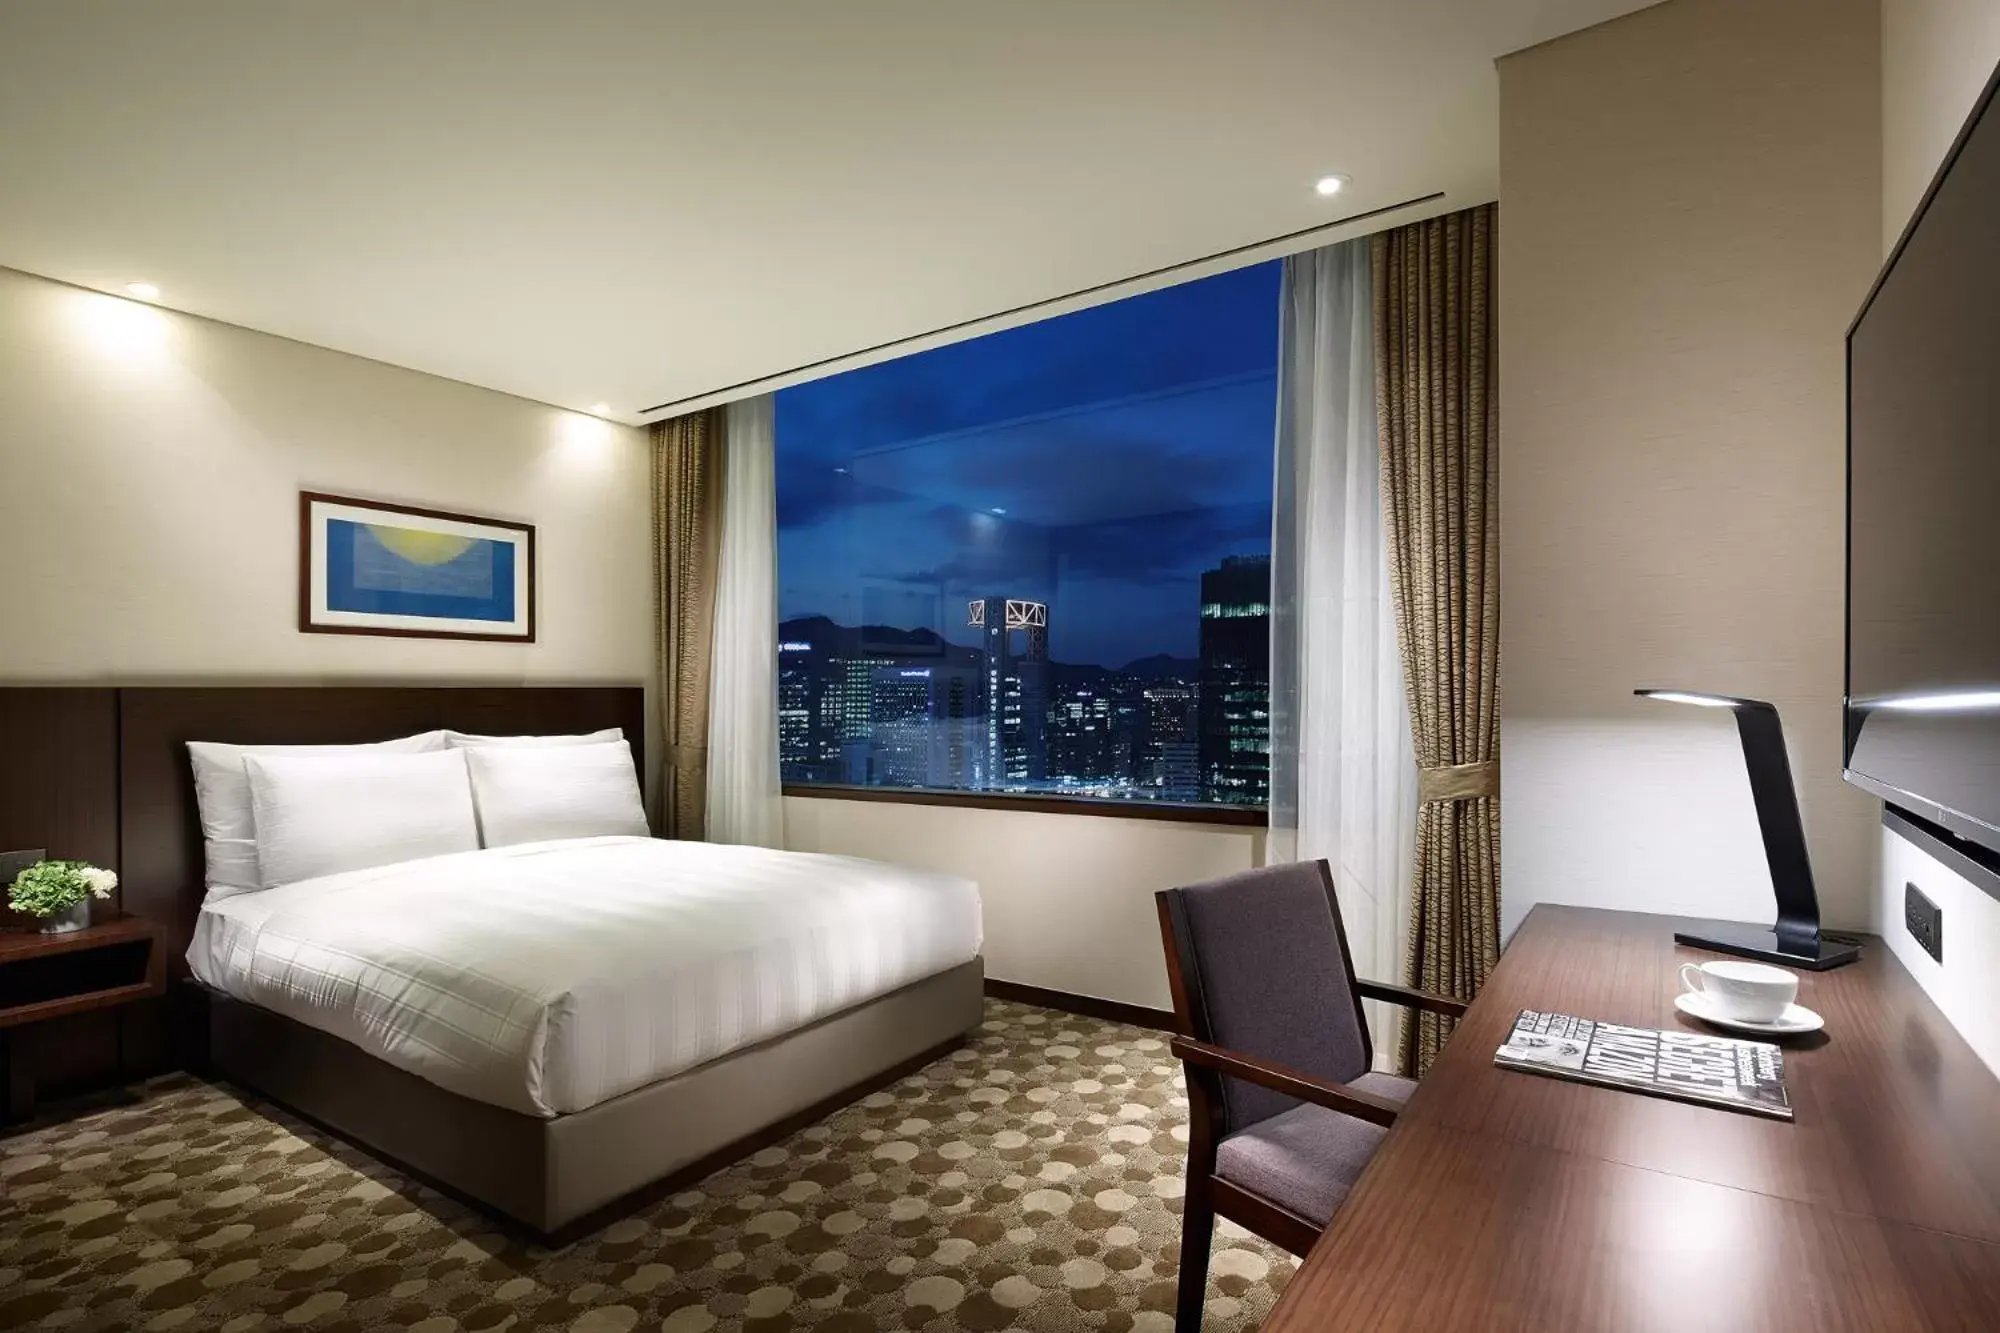 Bed in LOTTE City Hotel Myeongdong